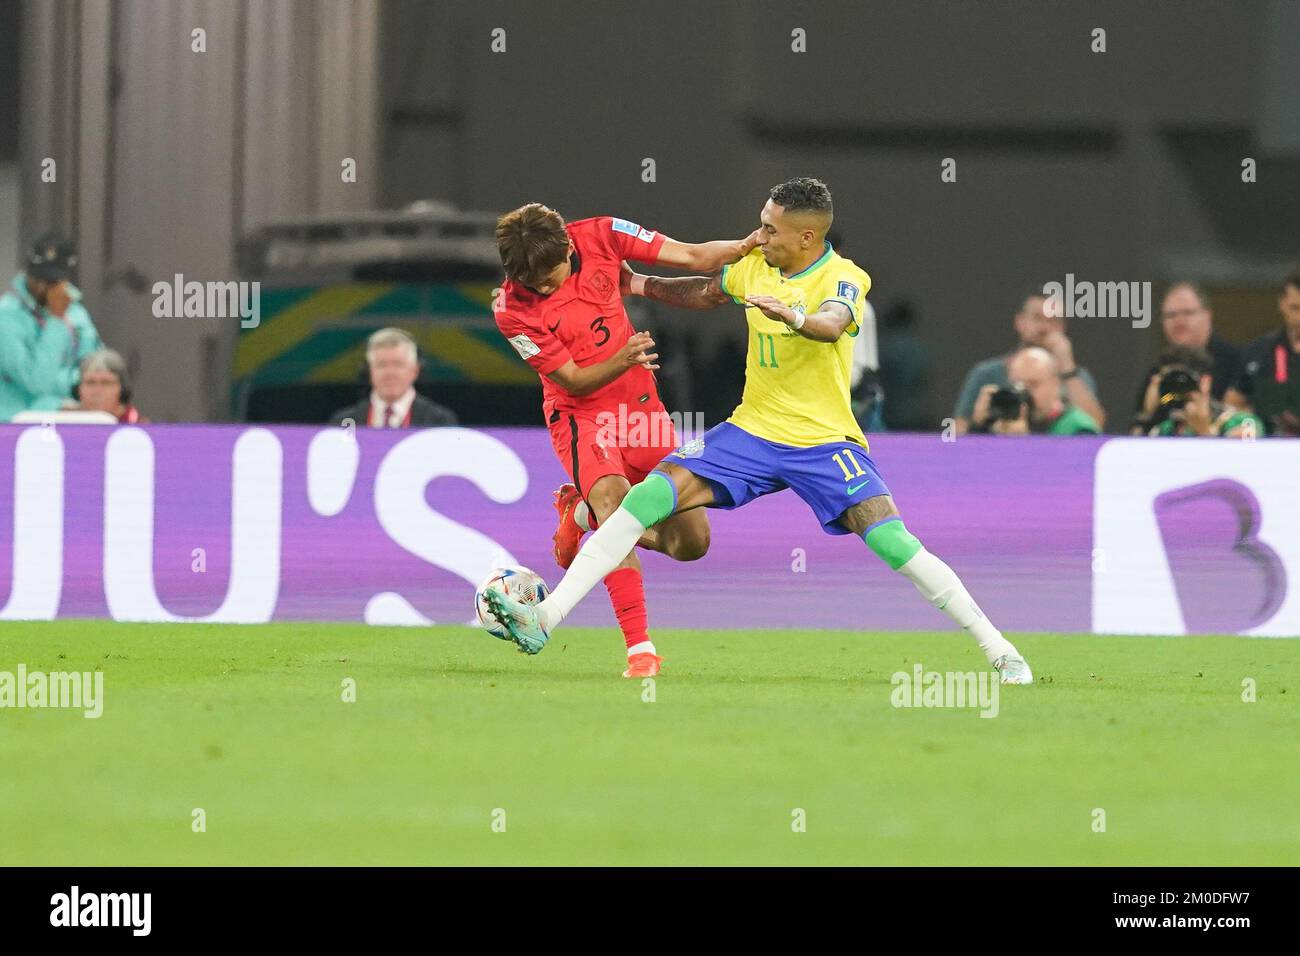 DOHA, QATAR - DECEMBER 5: Player of Brazil Raphinha fights for the ball with player of South Korea Kim Jin-su during the FIFA World Cup Qatar 2022 Round of 16 match between Brazil and South Korea at Stadium 974 on December 5, 2022 in Doha, Qatar. (Photo by Florencia Tan Jun/PxImages) Stock Photo